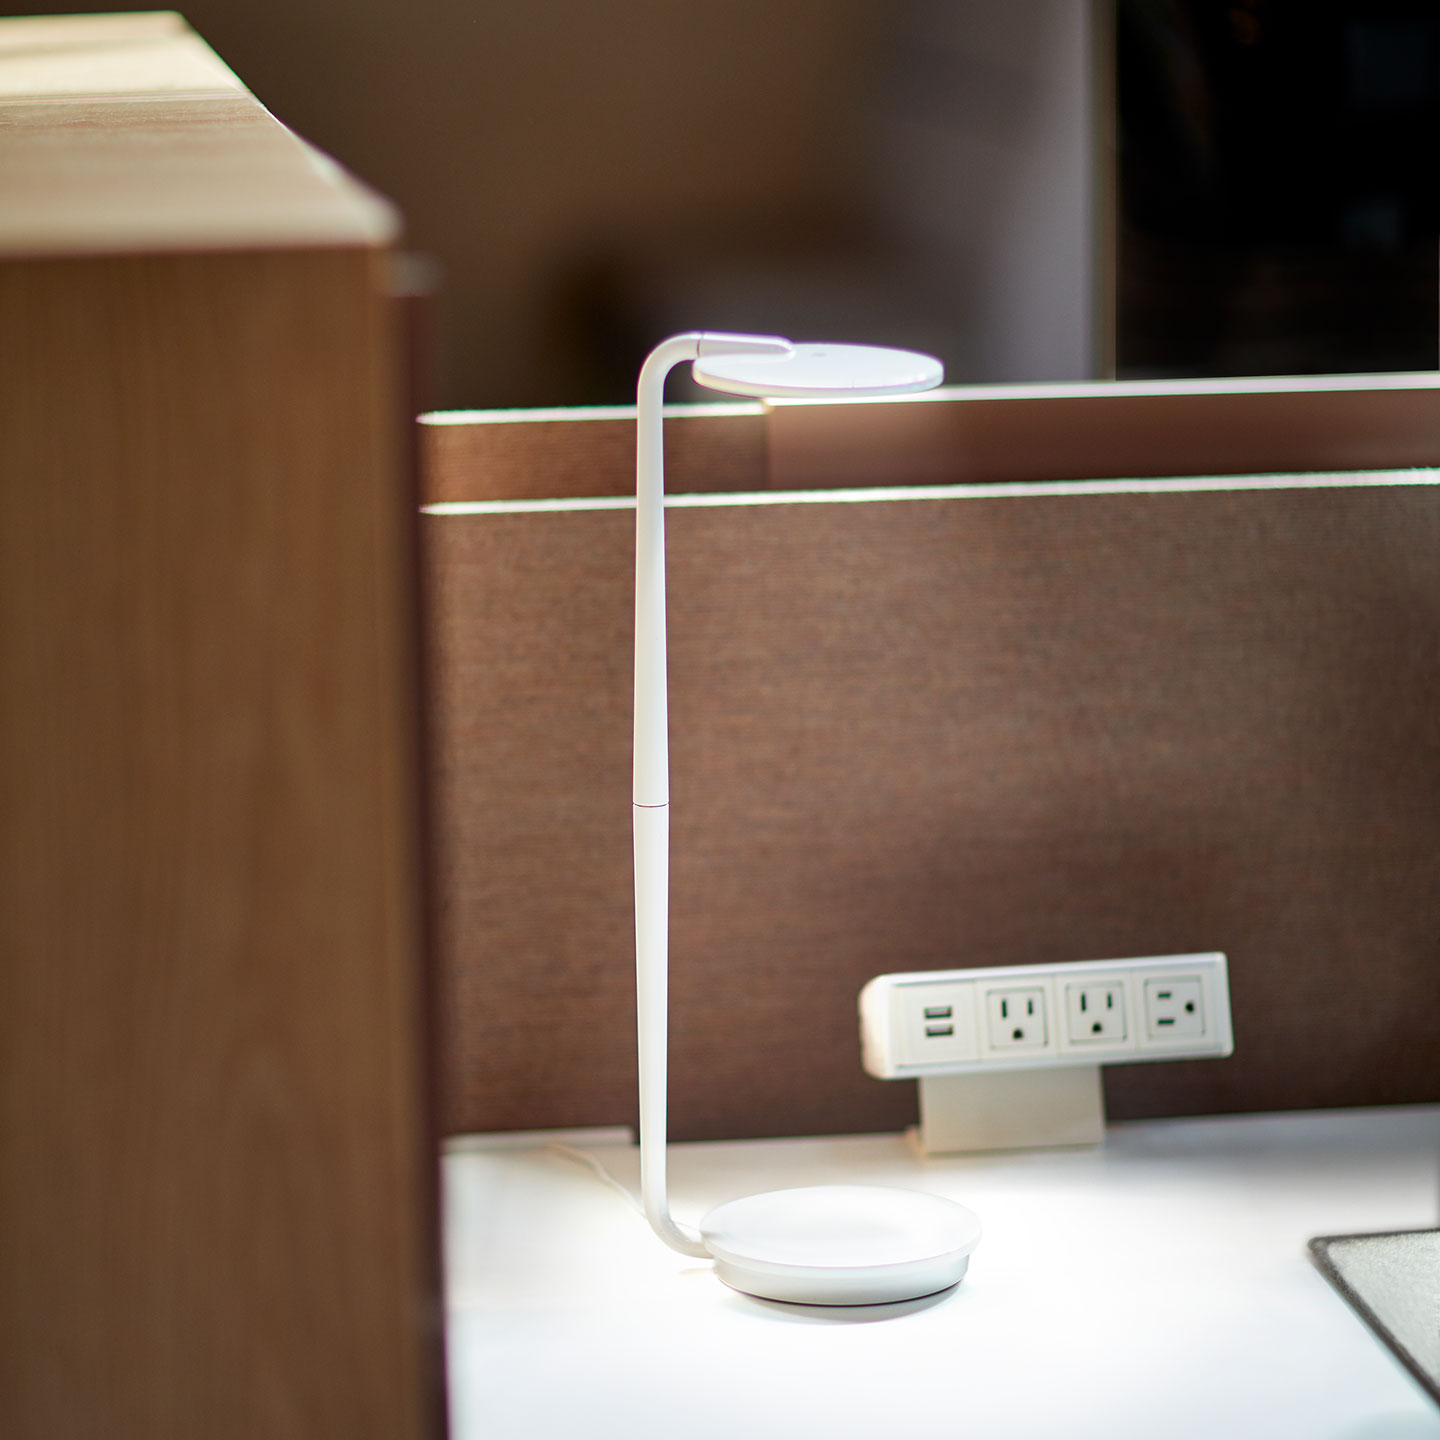 Haworth Pixo Lighting in white color on desk with wood divider